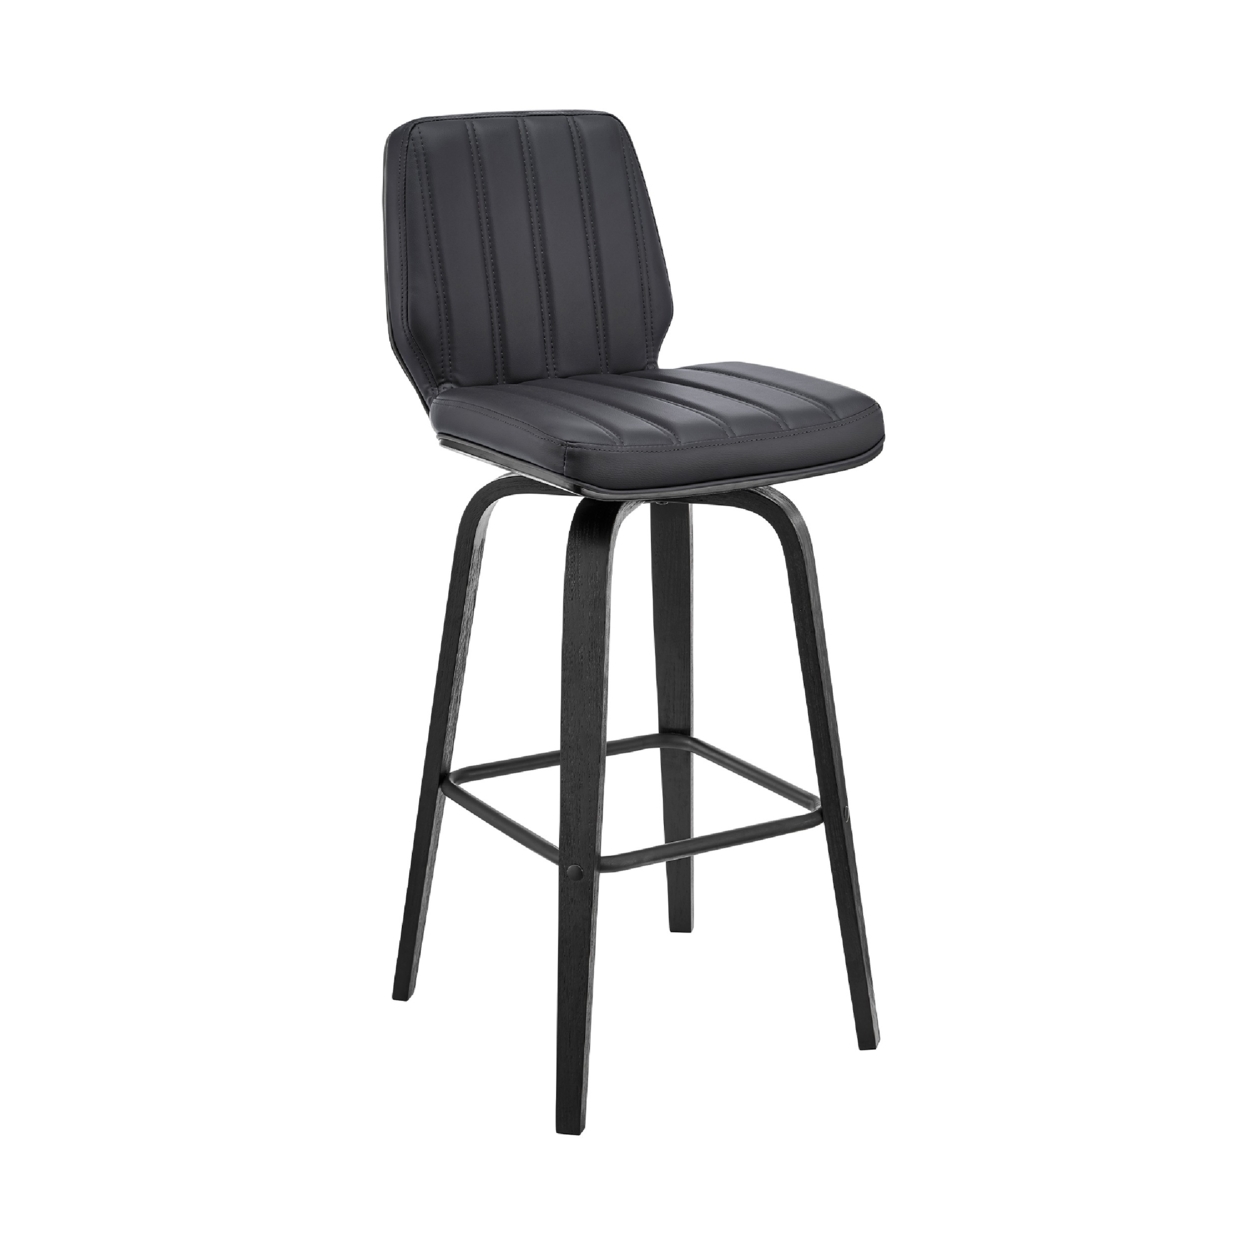 Swivel Barstool With Channel Stitching And Wooden Support, Black- Saltoro Sherpi